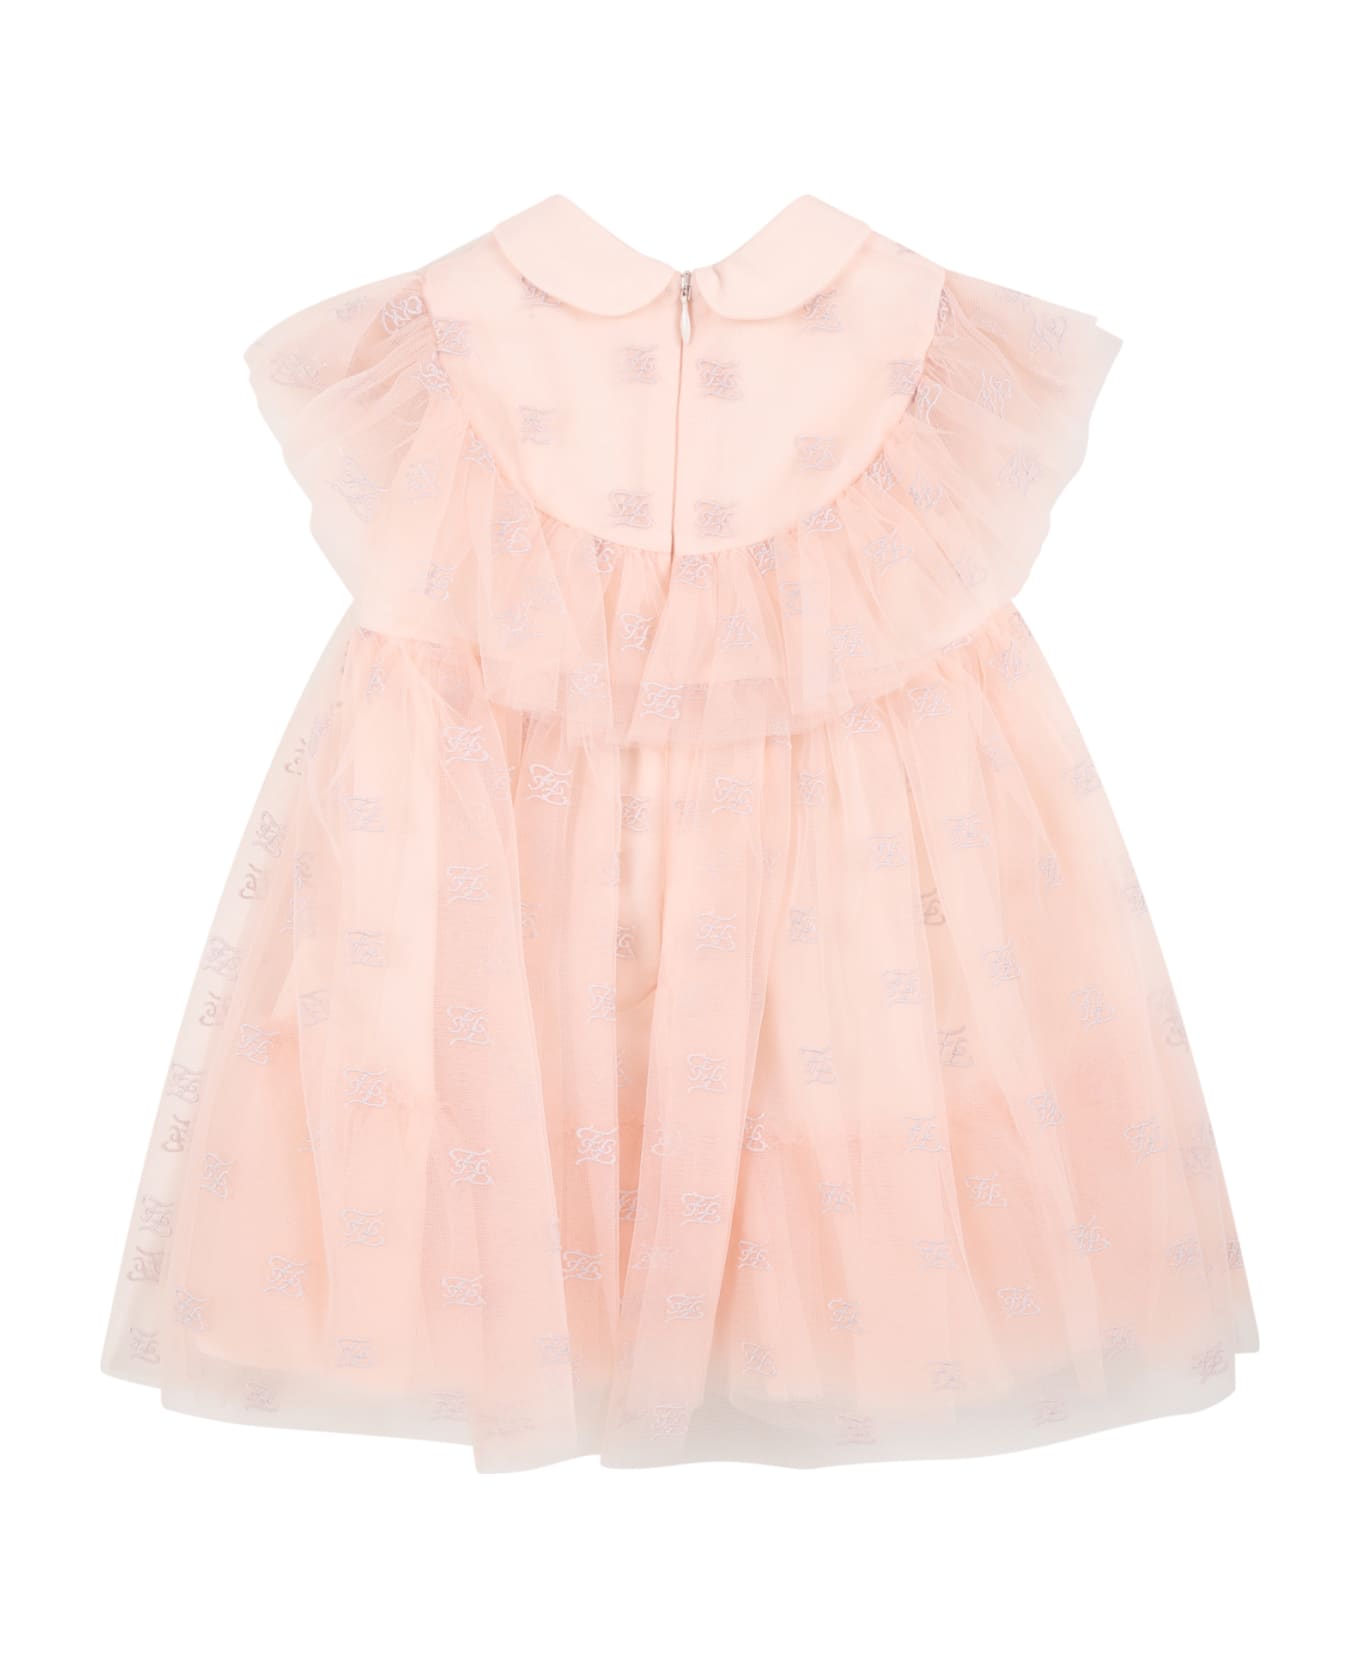 Fendi Pink Dress For Baby Girl With Embroidered Logo - Pink